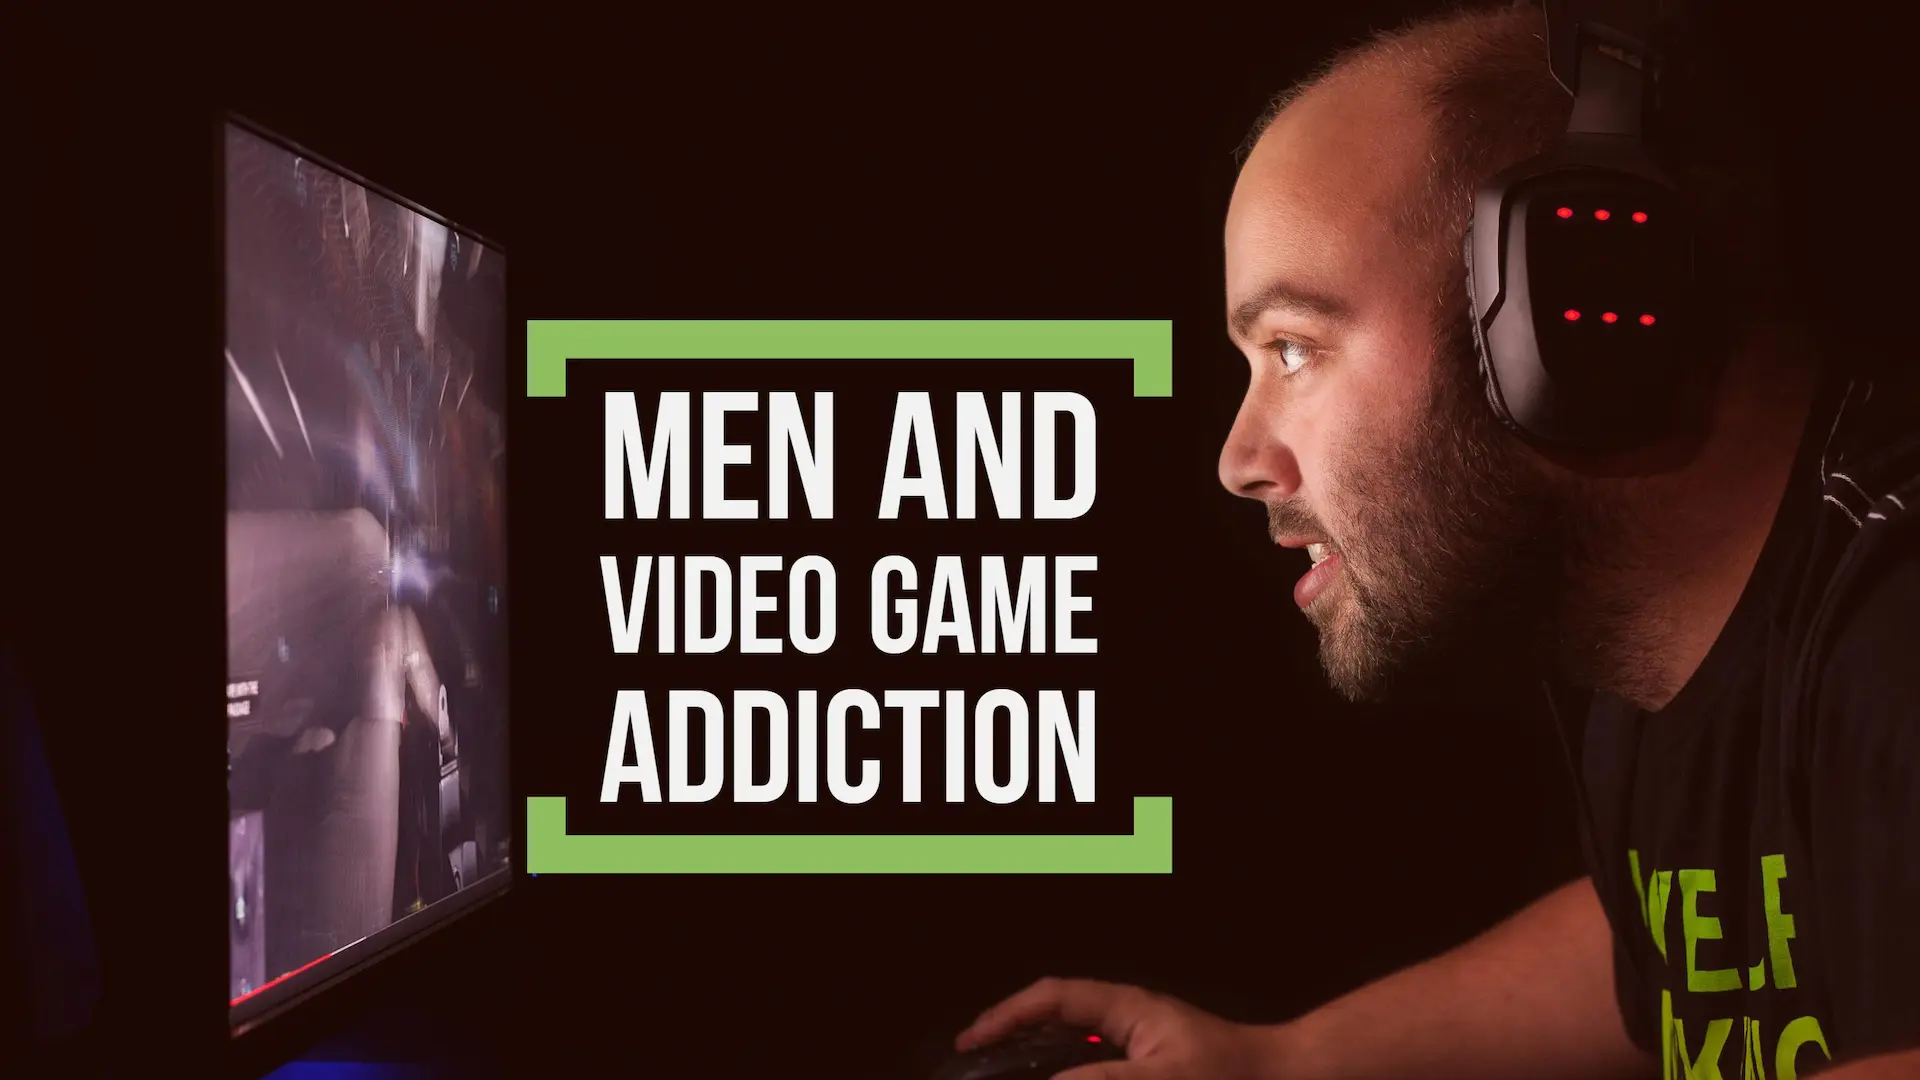 Video Game Addiction a Growing Health Problem for Men 